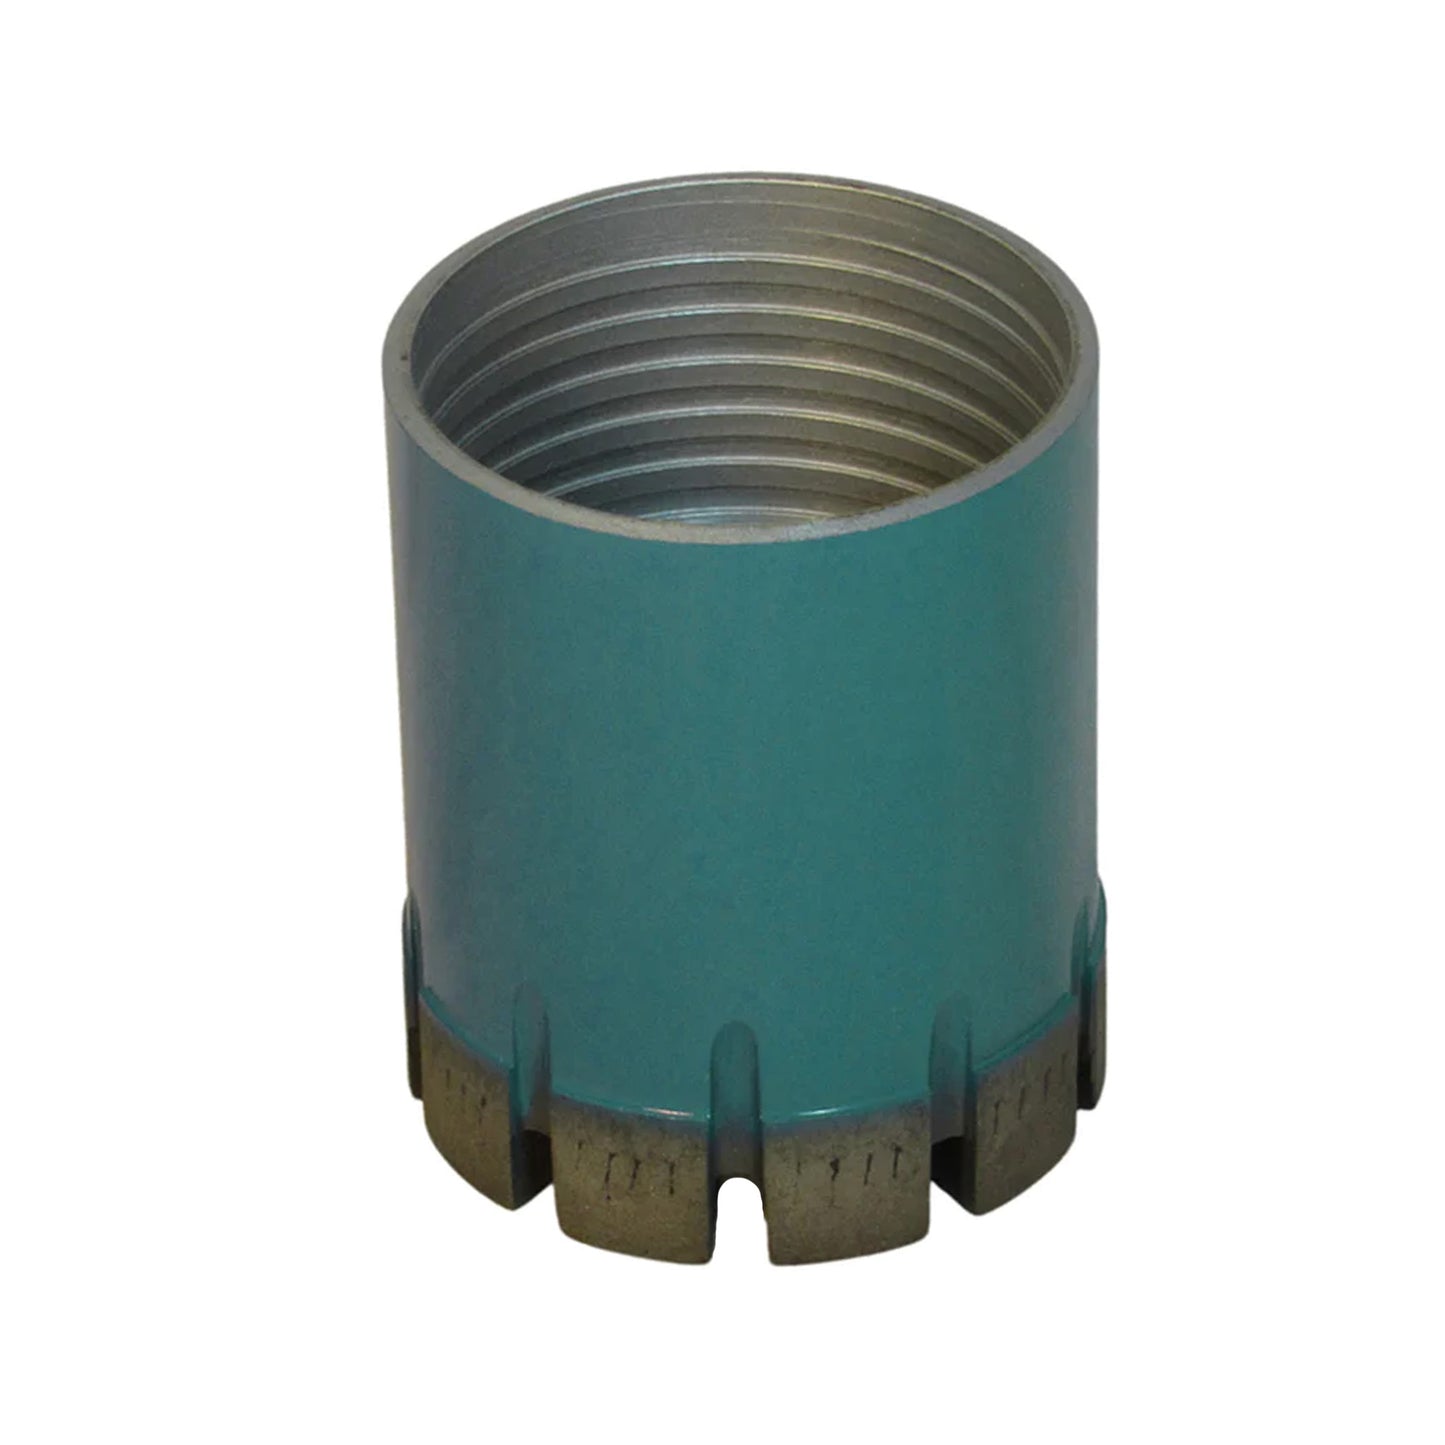 Eagle 2 - NWL3 Core Drill Bit - Set to Liner